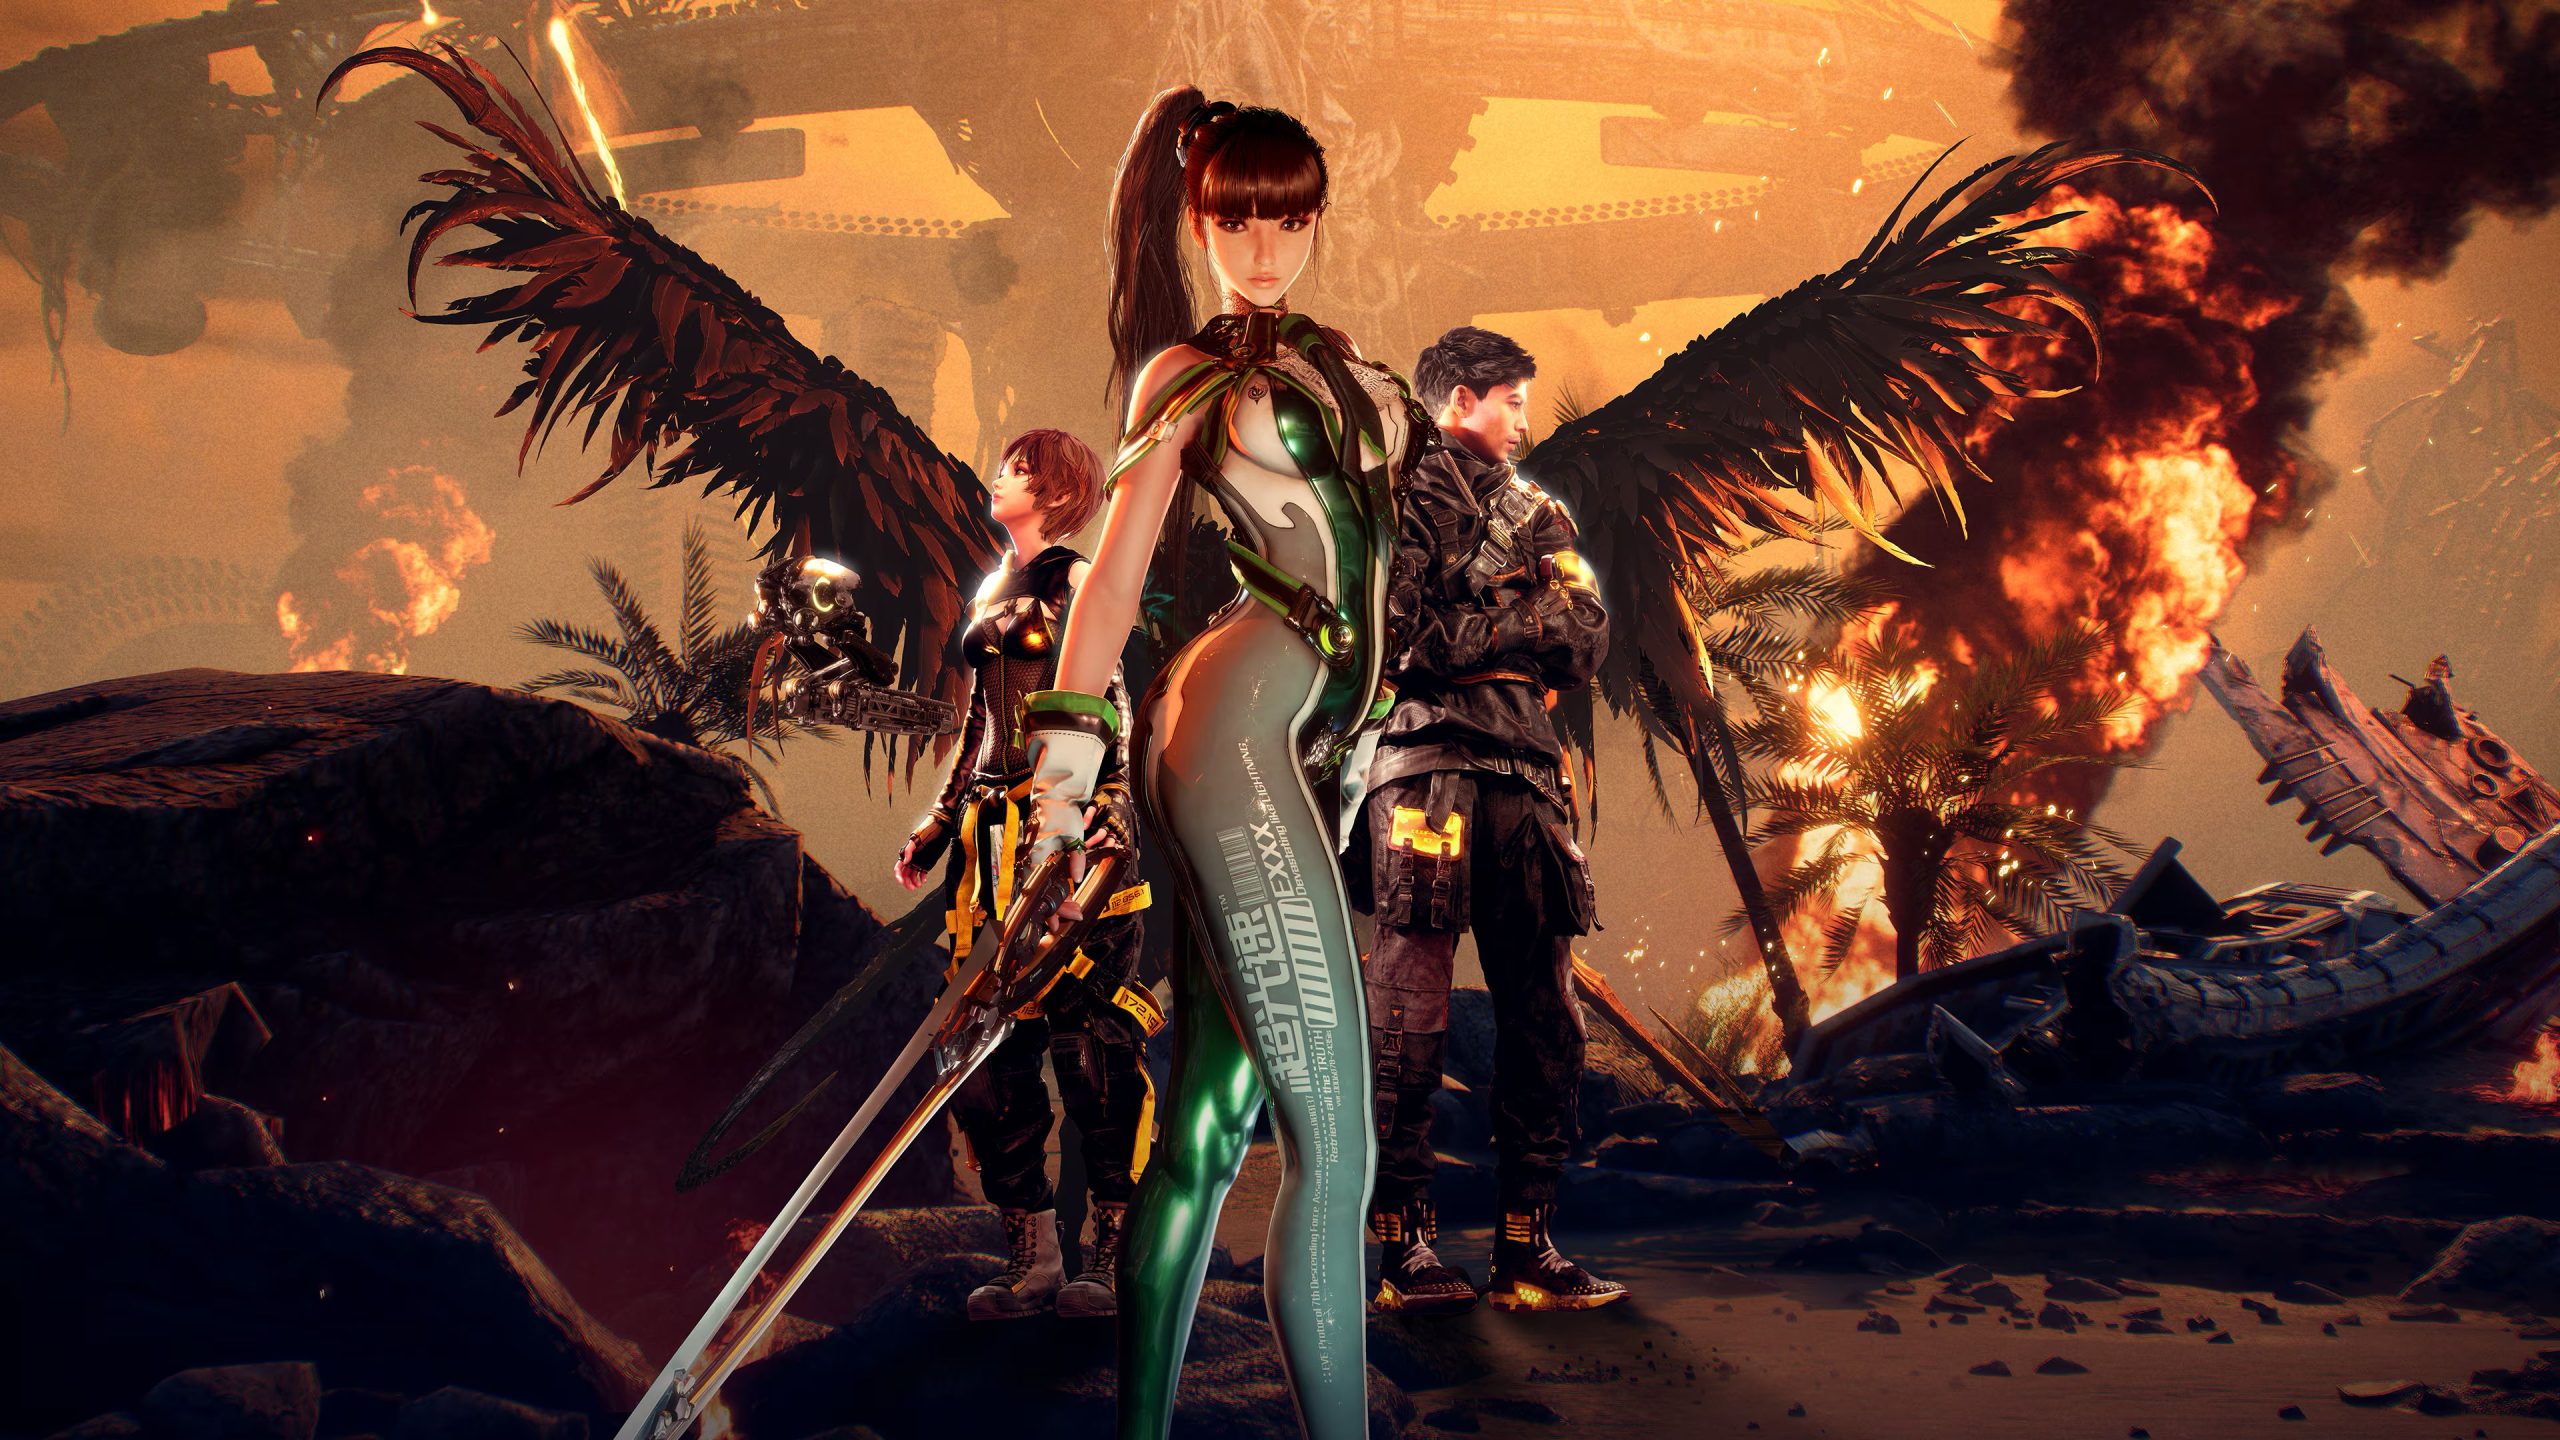 promotional image of Stellar Blade showing hero Eve centered, striking a combat pose with her hip thrust out